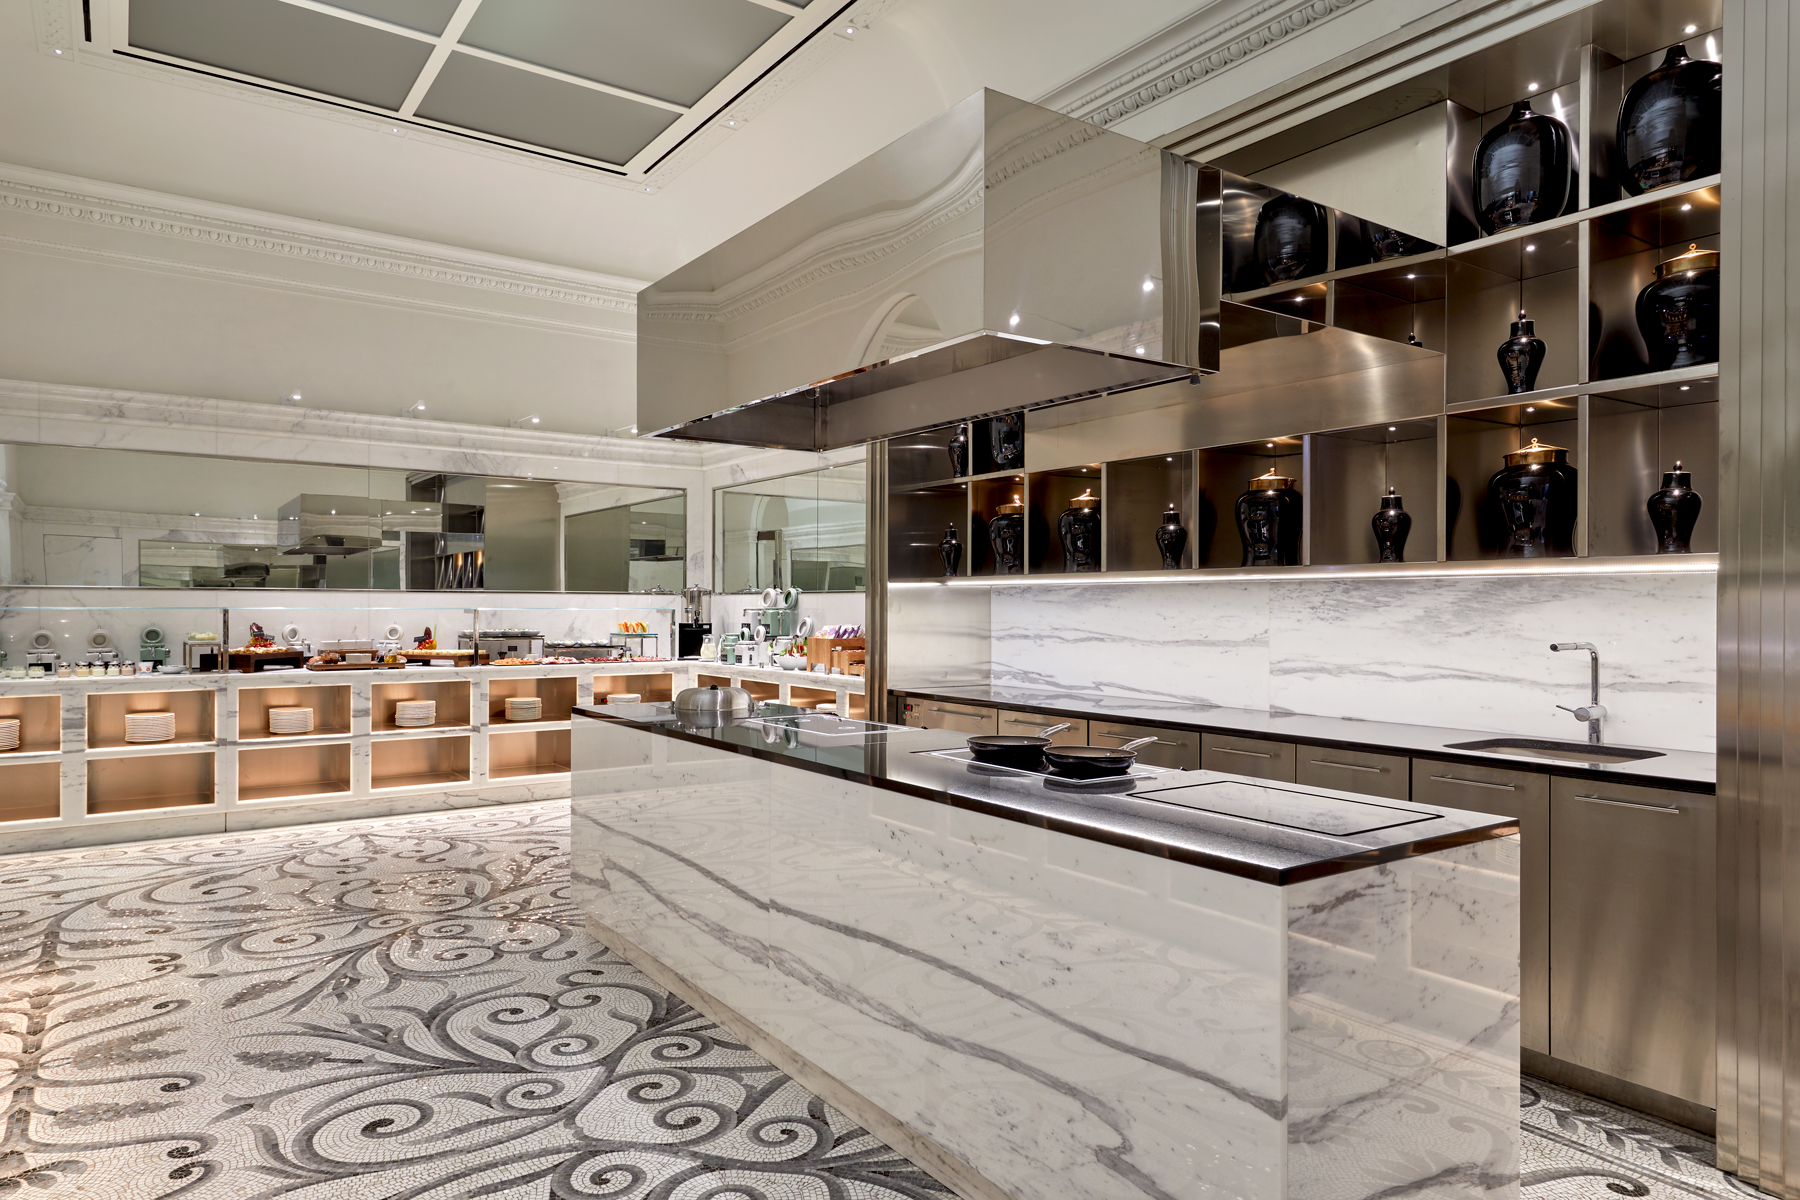 The St. Regis Rome Hotel undergoes a modern makeover.